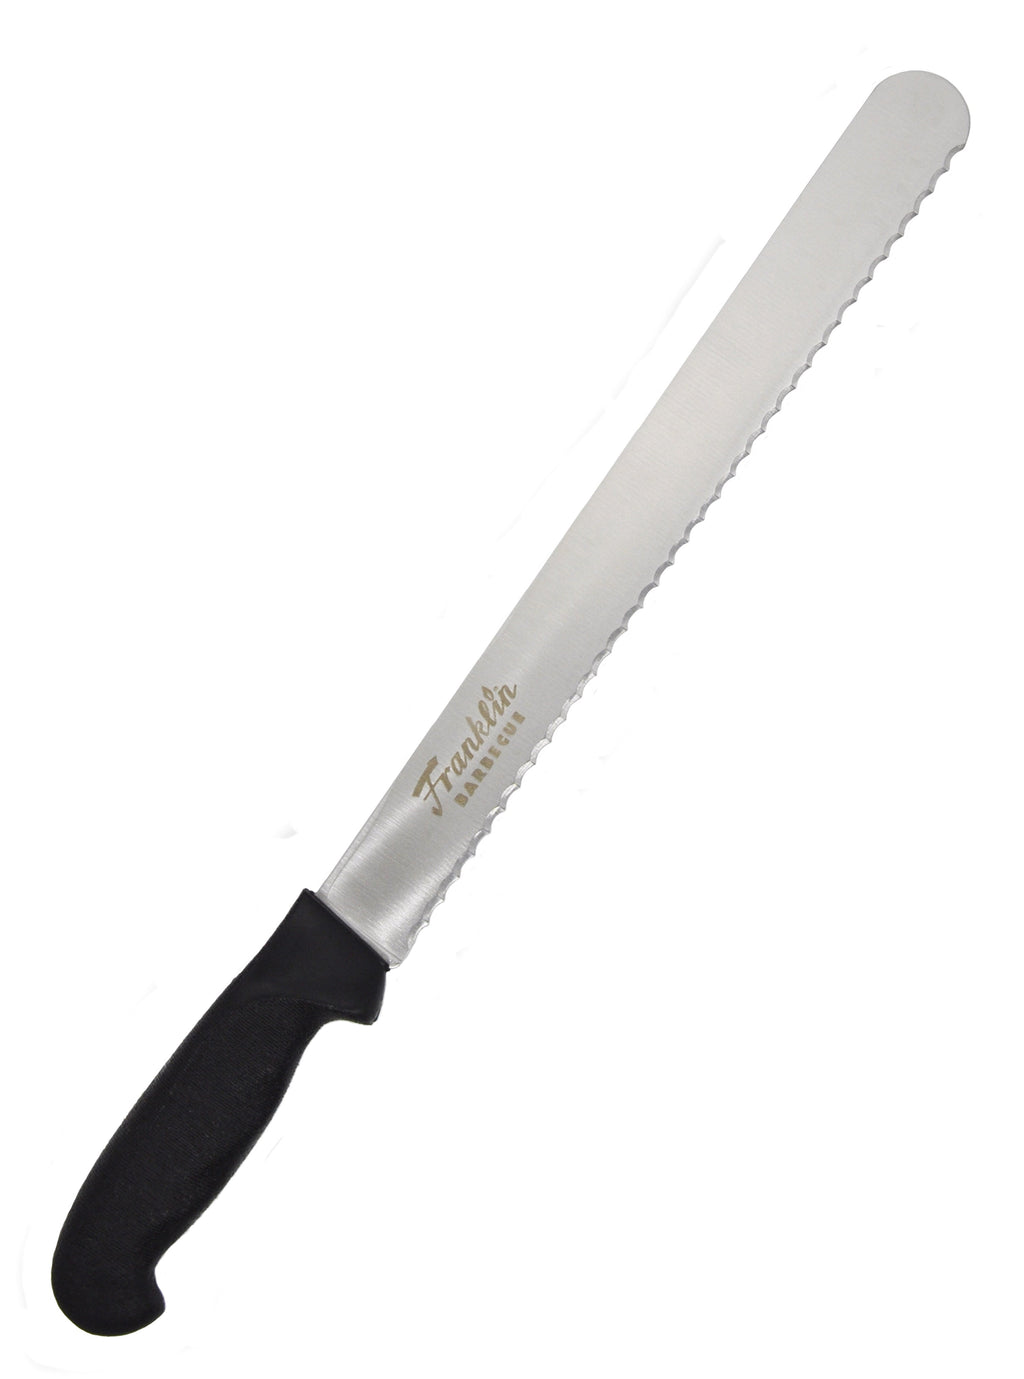 Franklin Dexter-Russell Slicer knife with stainless steel blade and black plastic handle